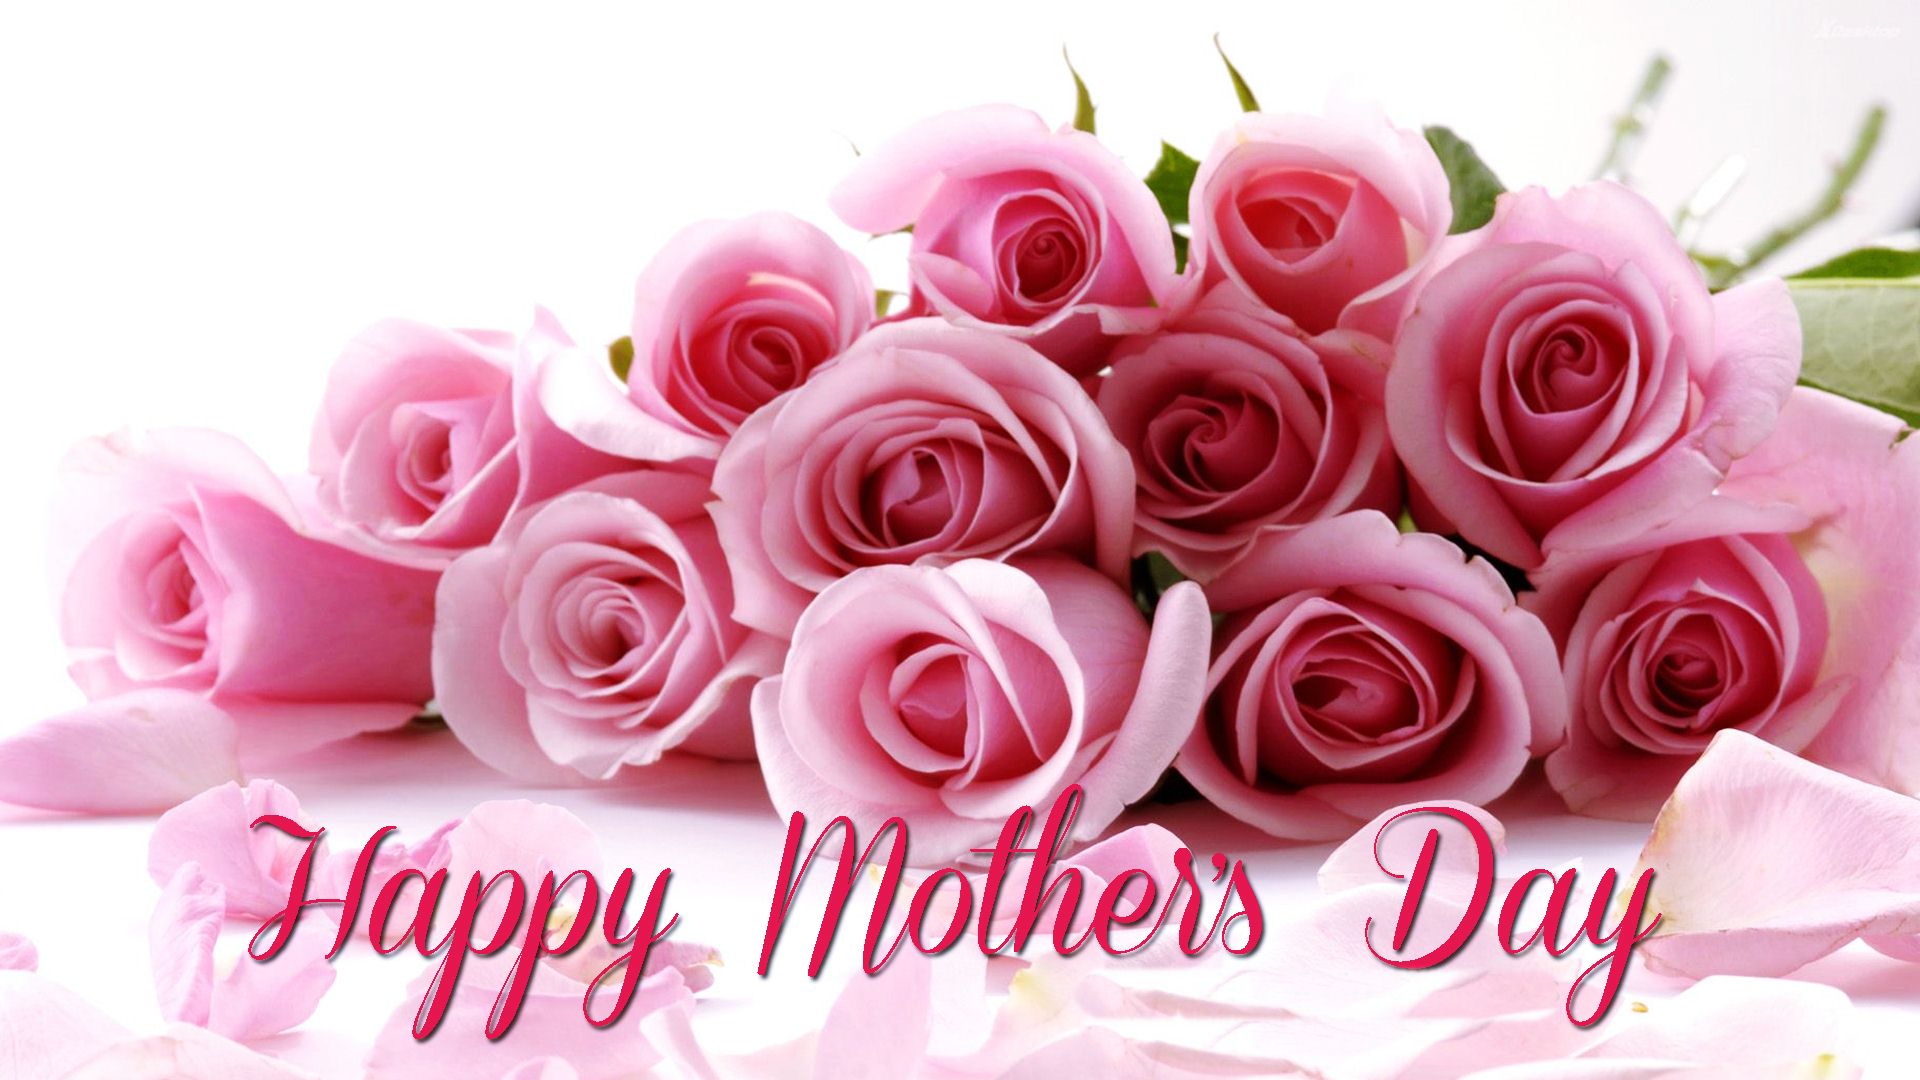 Mothers Day Image Wallpaper Background